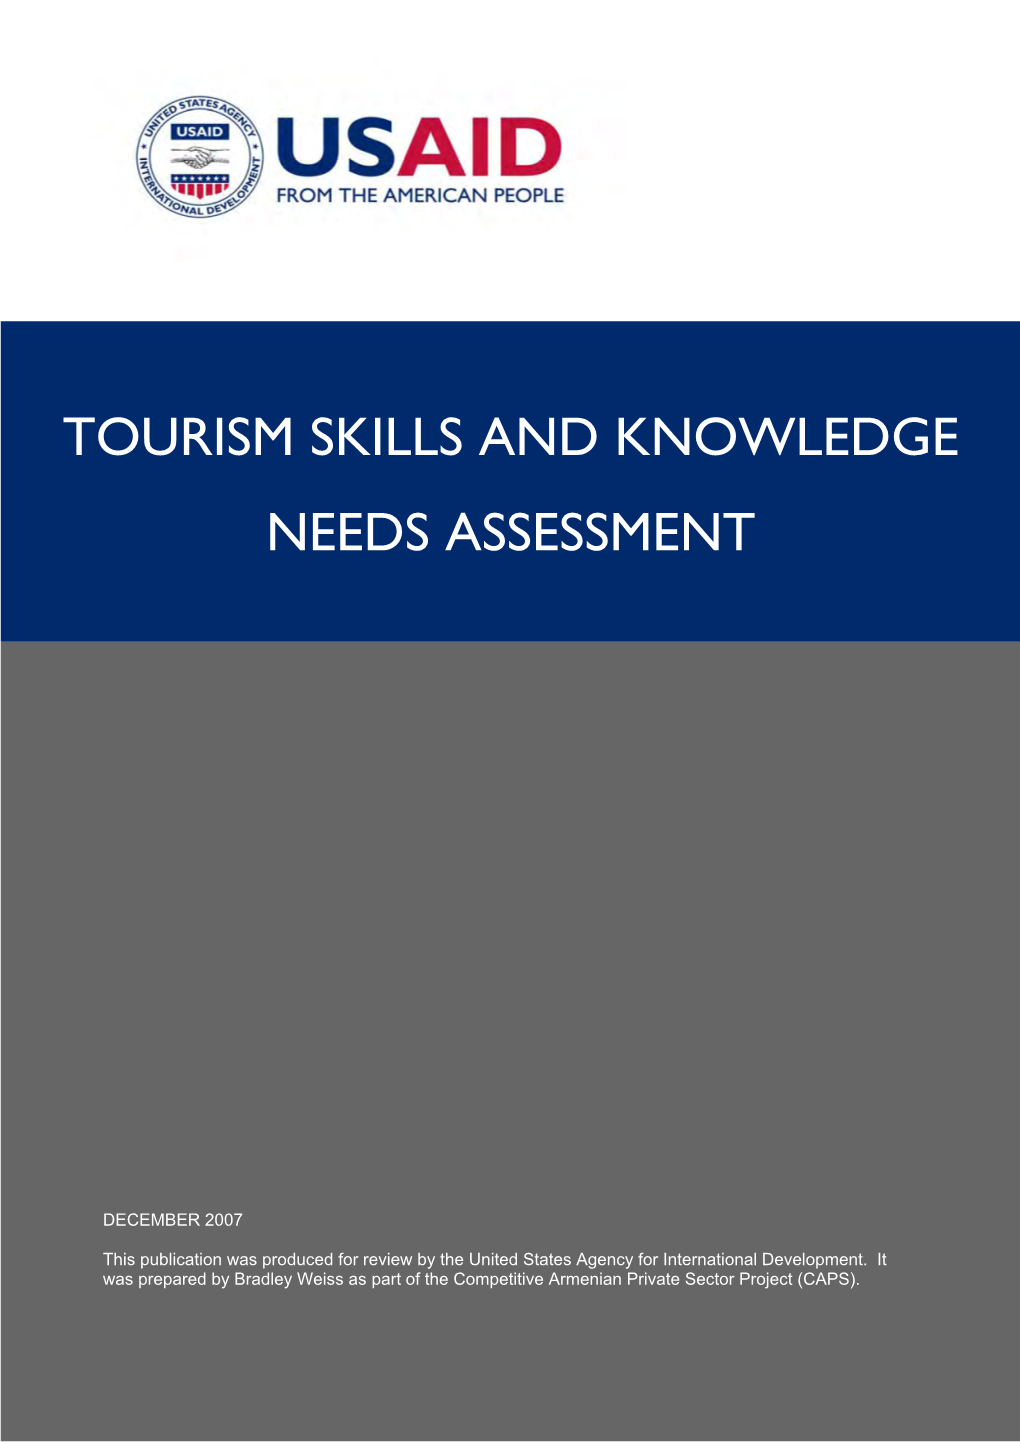 Tourism Skills and Knowledge Needs Assessment